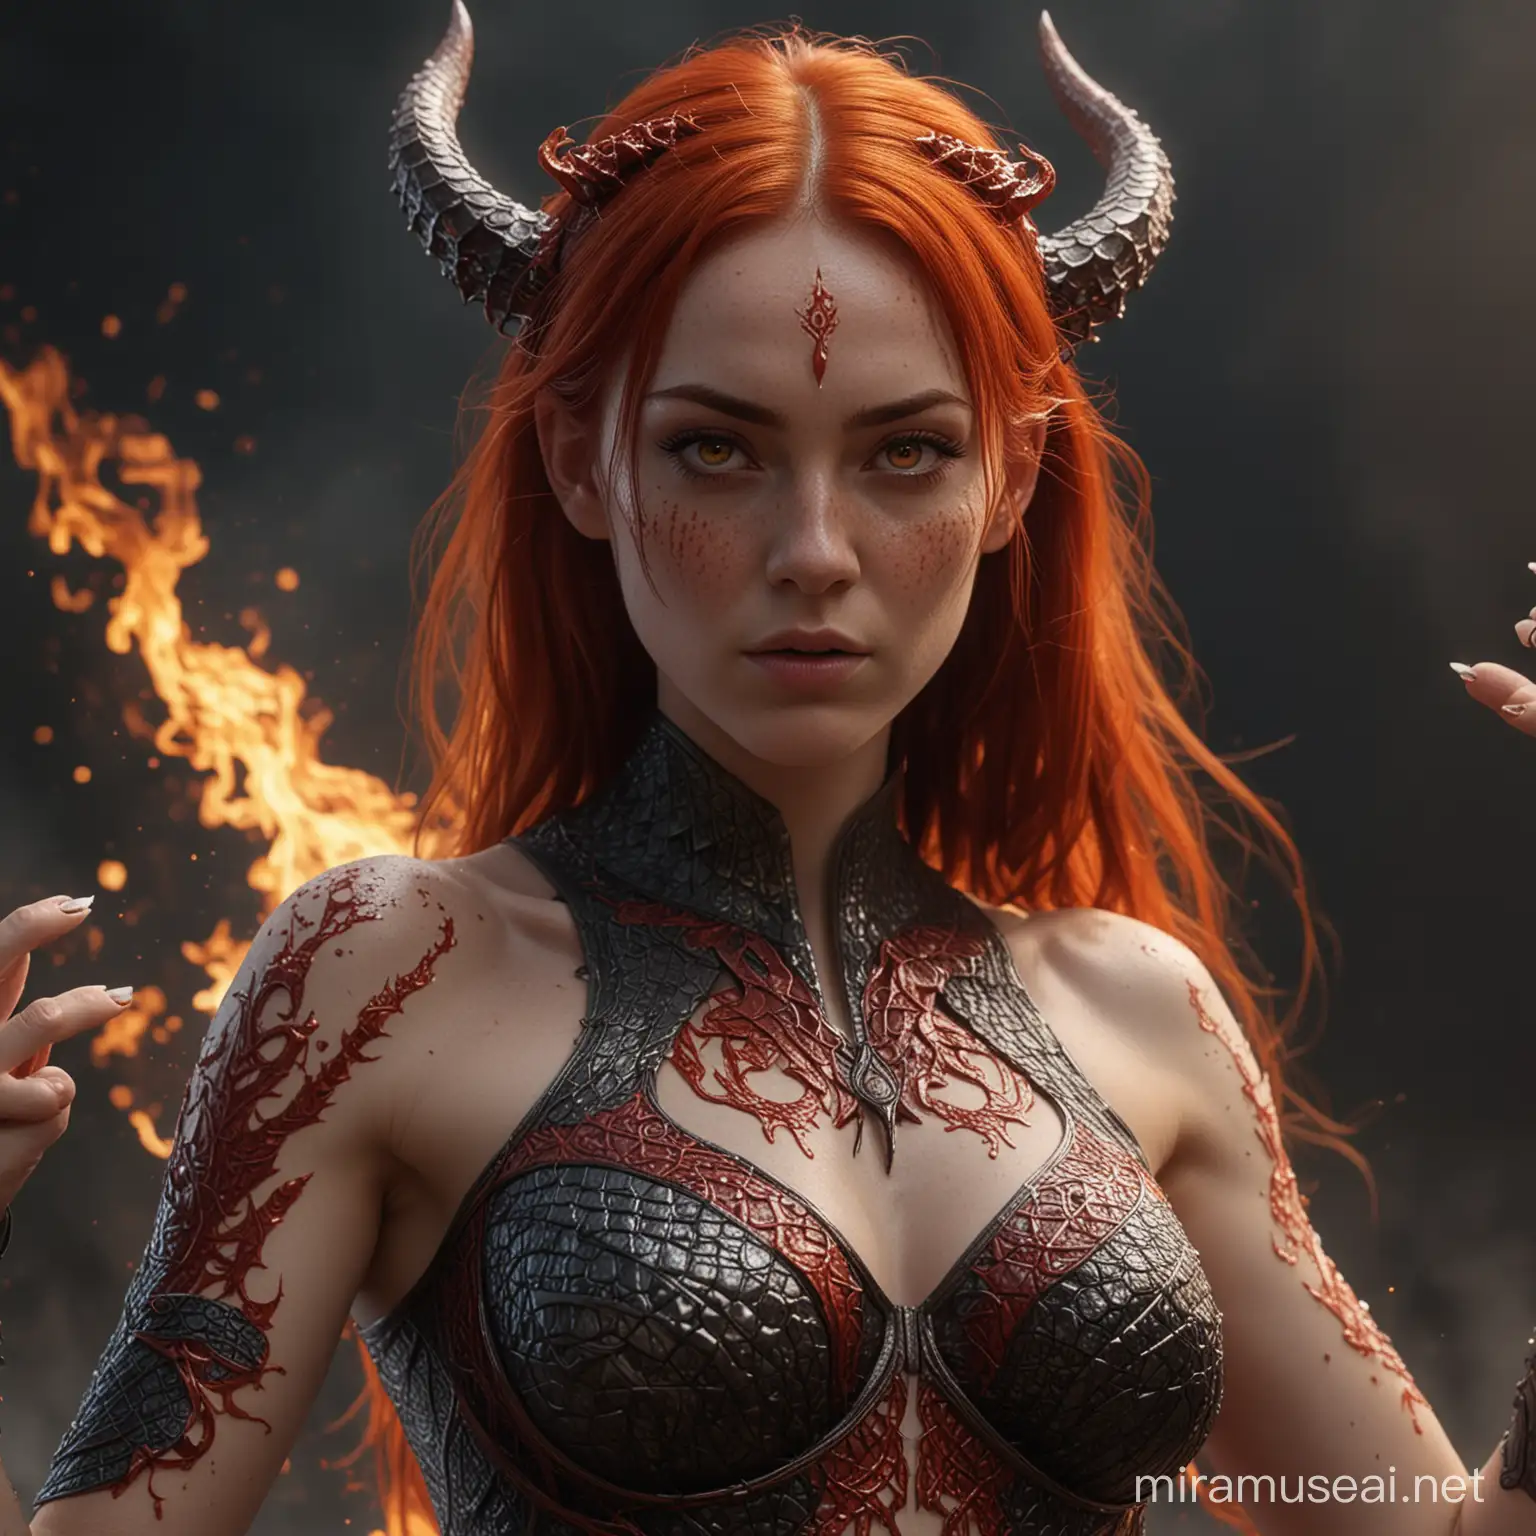 hyperrealistic very high detail 4k full body long shot photograph taken from the left with depth perception, showing a female human with sleek pointy horns curving backwards over the head, with long fiery red hair thin red eyebrows, burning red eyes and face full of freckles, with draconic symbols carved into arms and body, sleeveless open front top made of dragon scales, throwing fireballs from hands unaffected by the heat